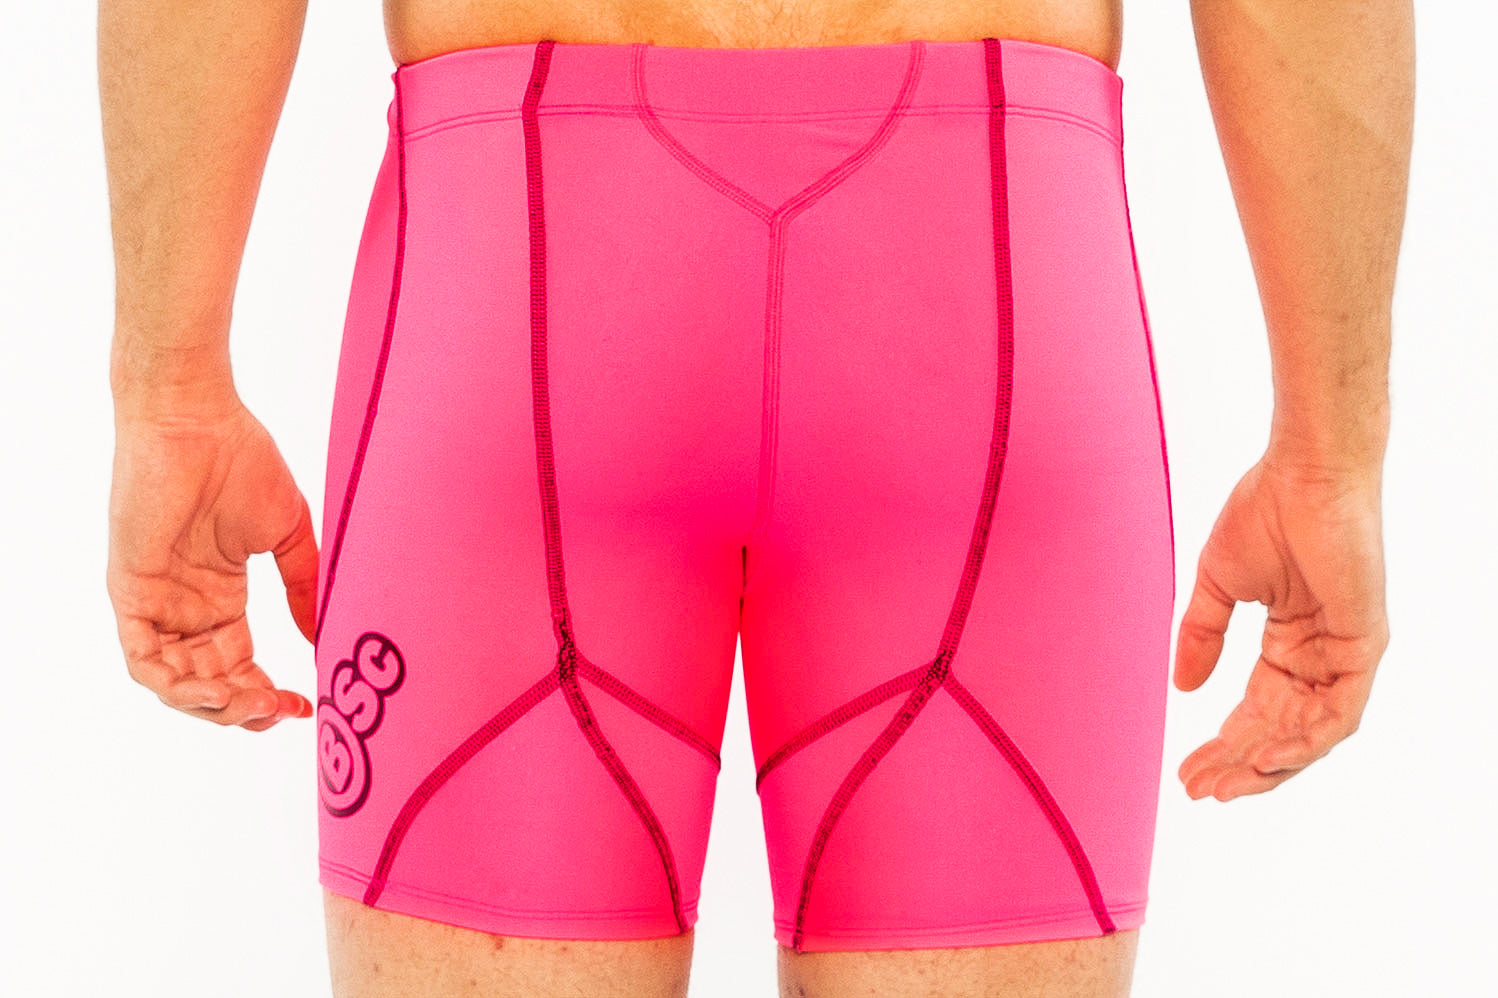 Women's Athlete Tights - PINK - BSc Body Science NZ